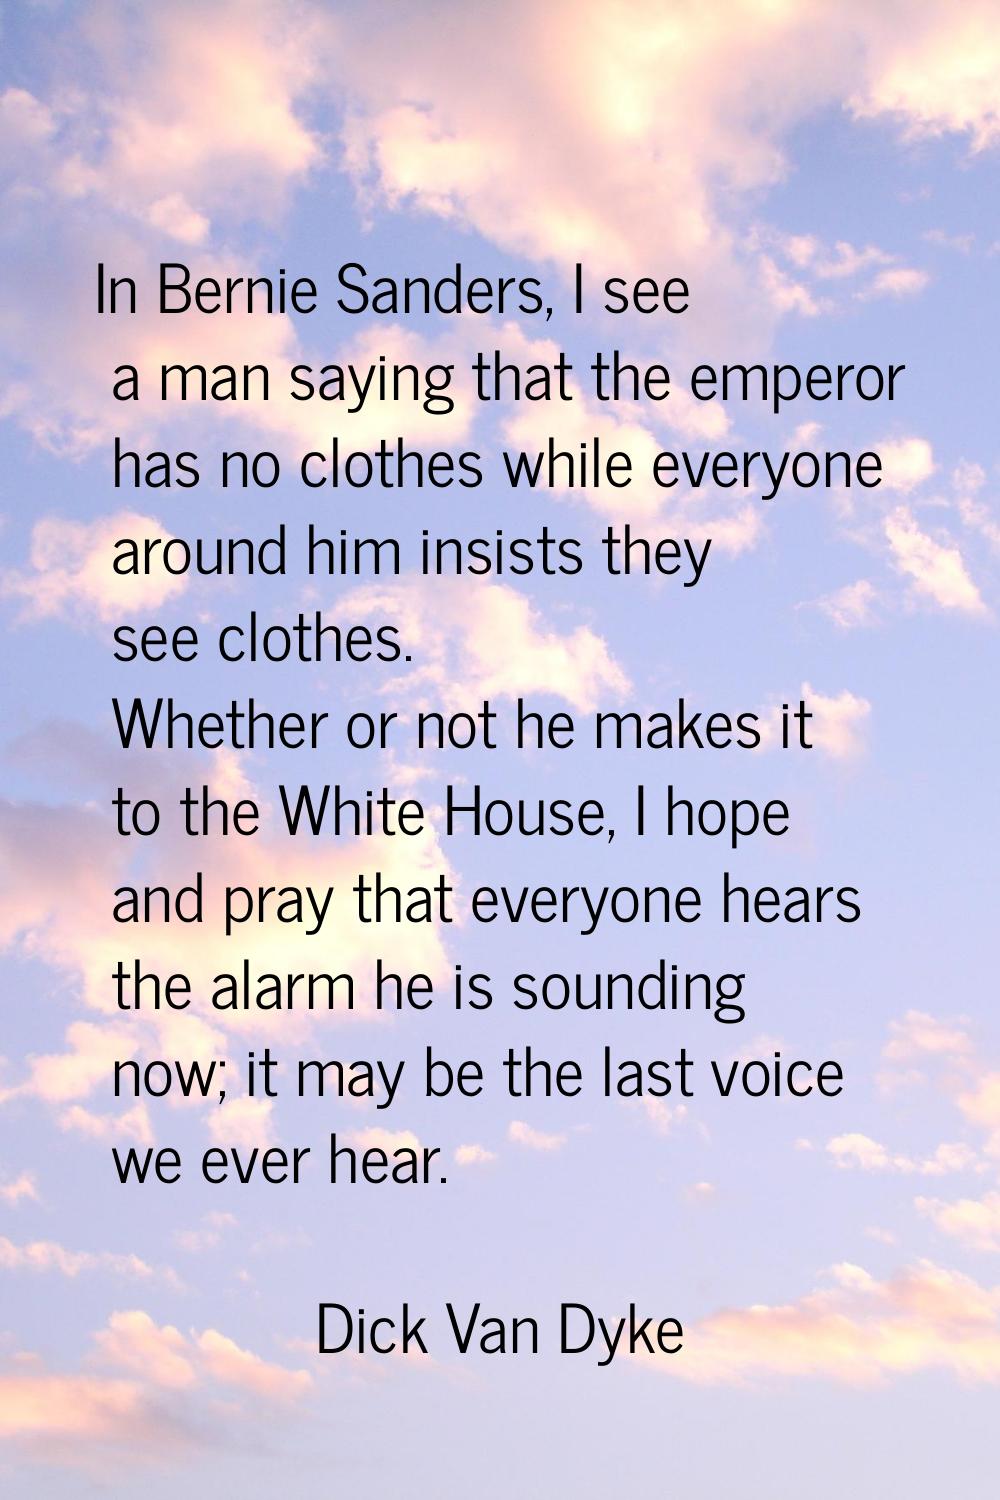 In Bernie Sanders, I see a man saying that the emperor has no clothes while everyone around him ins